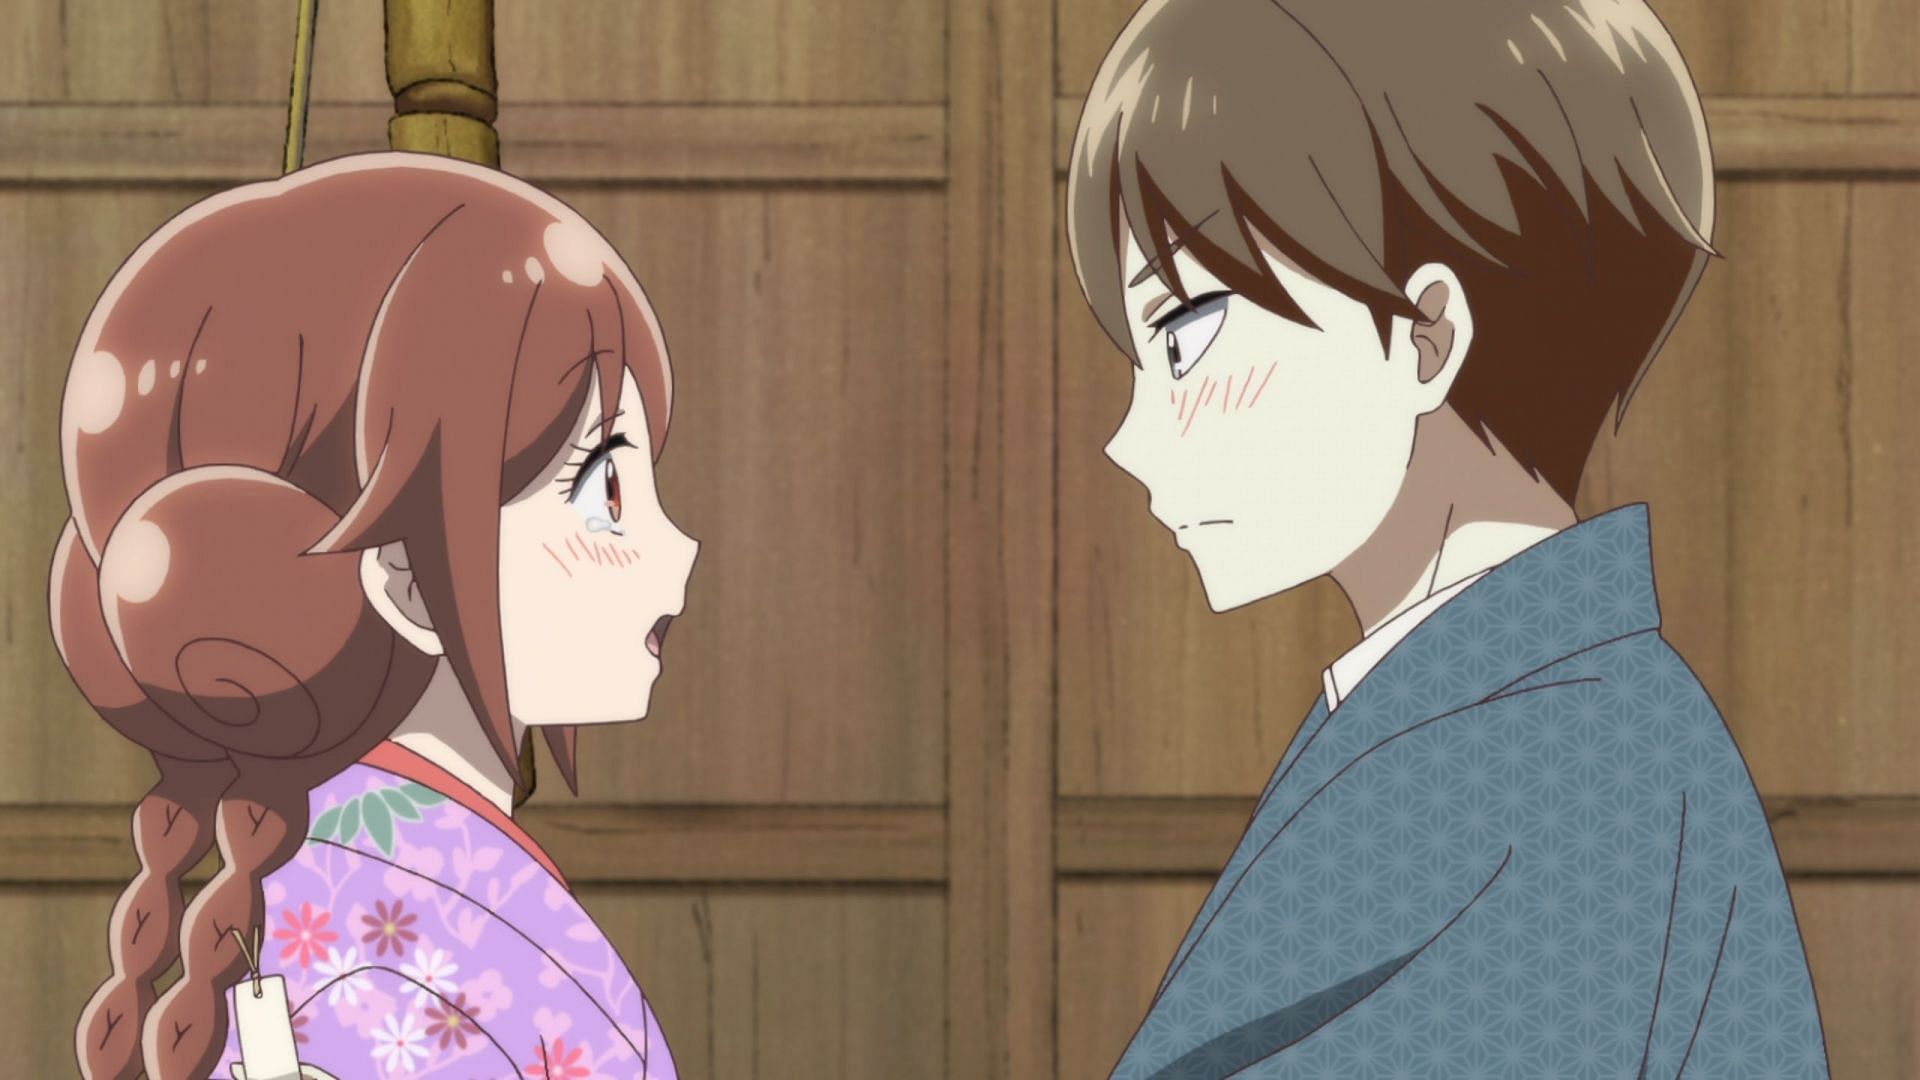 20 Romance Anime Where The Characters Actually End Up Together